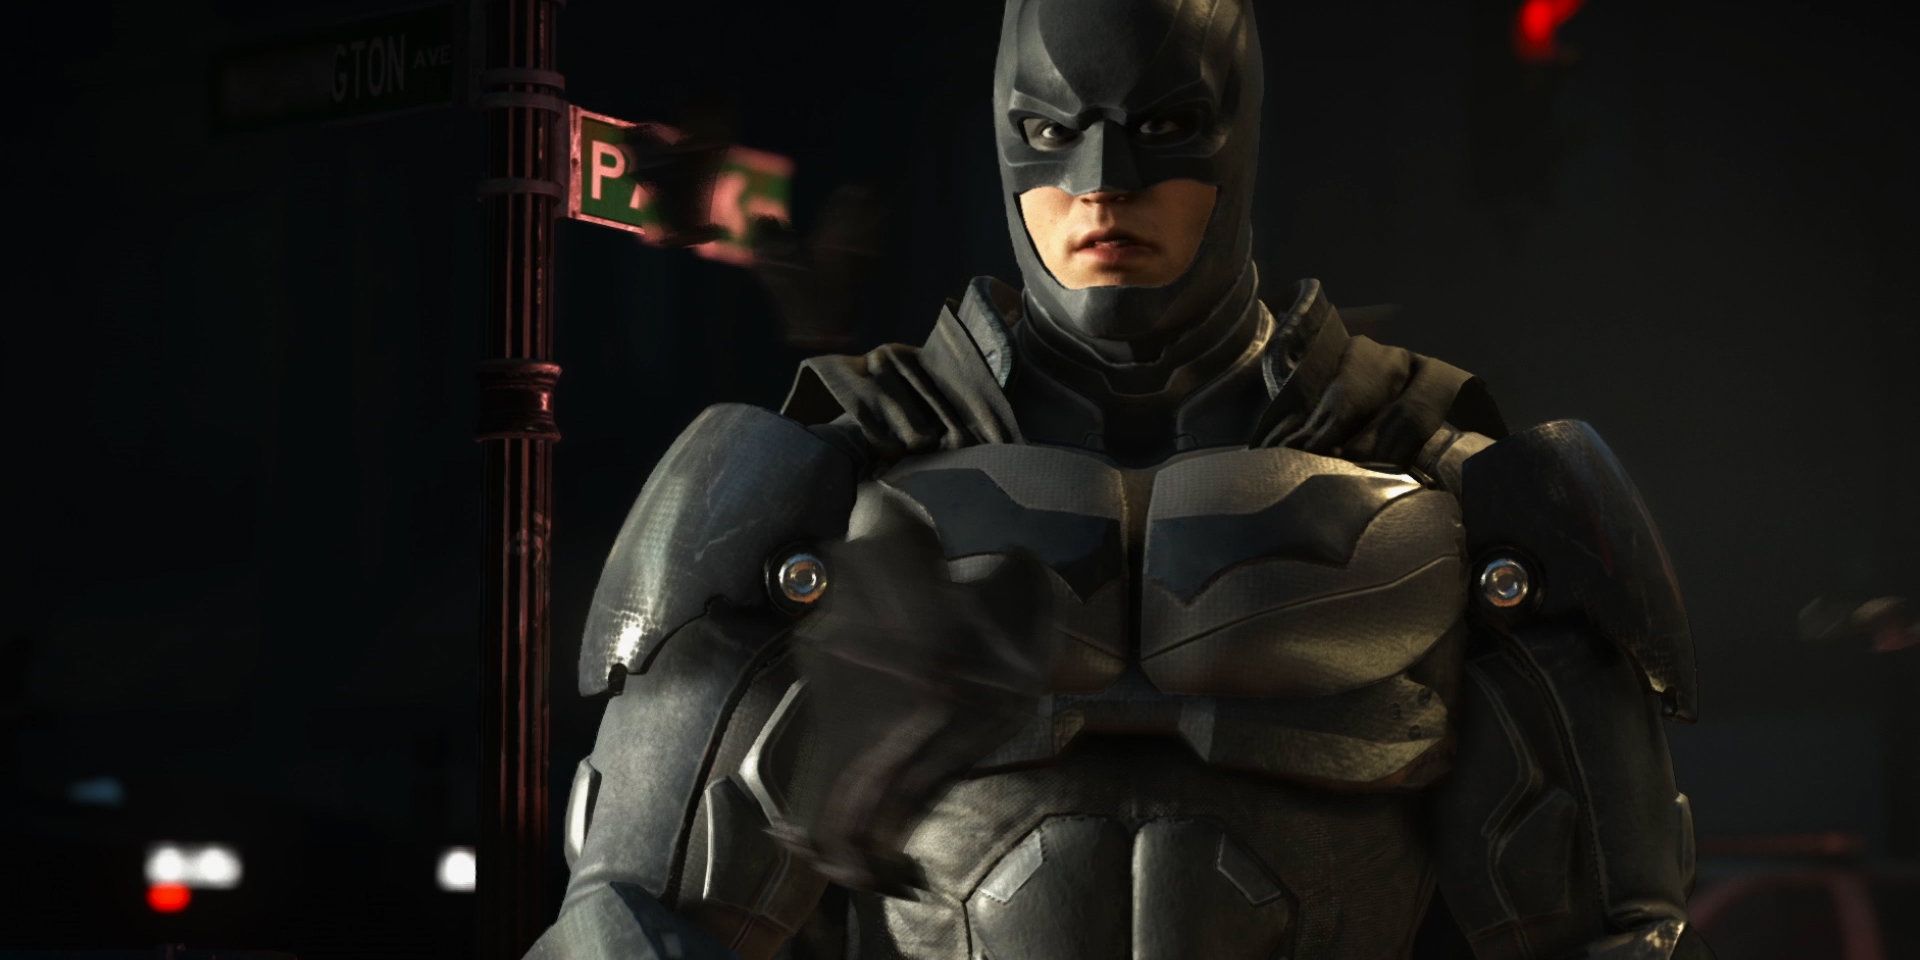 Batman open mouthed Injustice 2